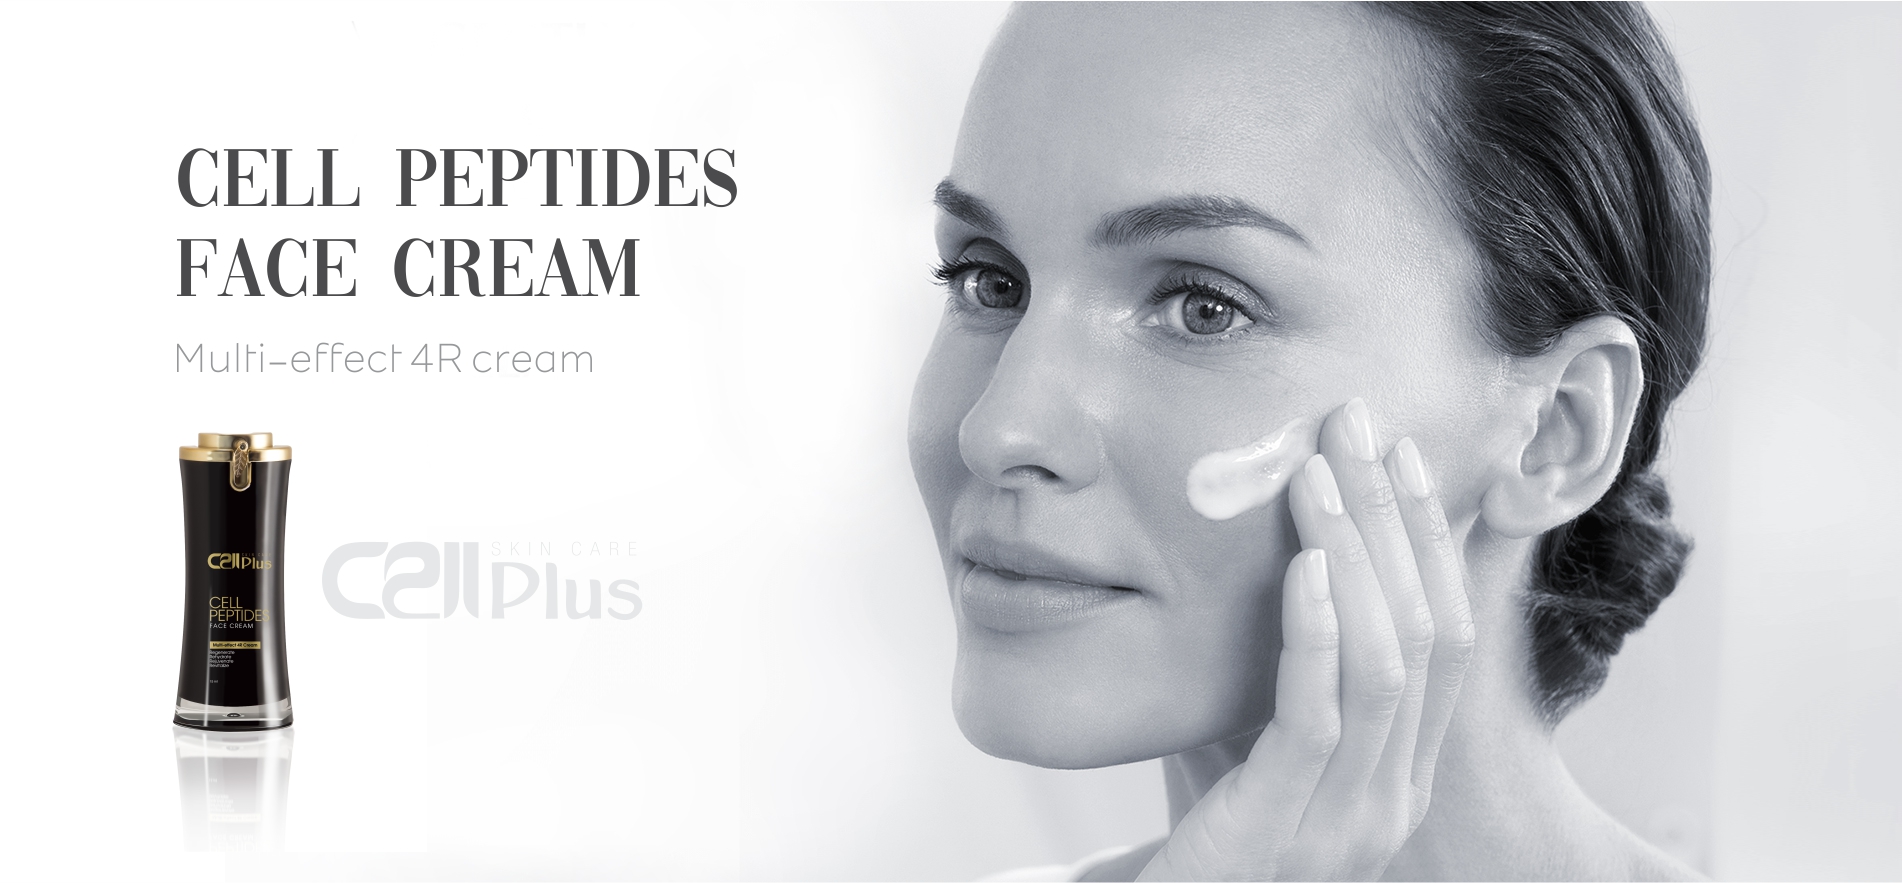 CELL PEPTIDES FACE CREAM